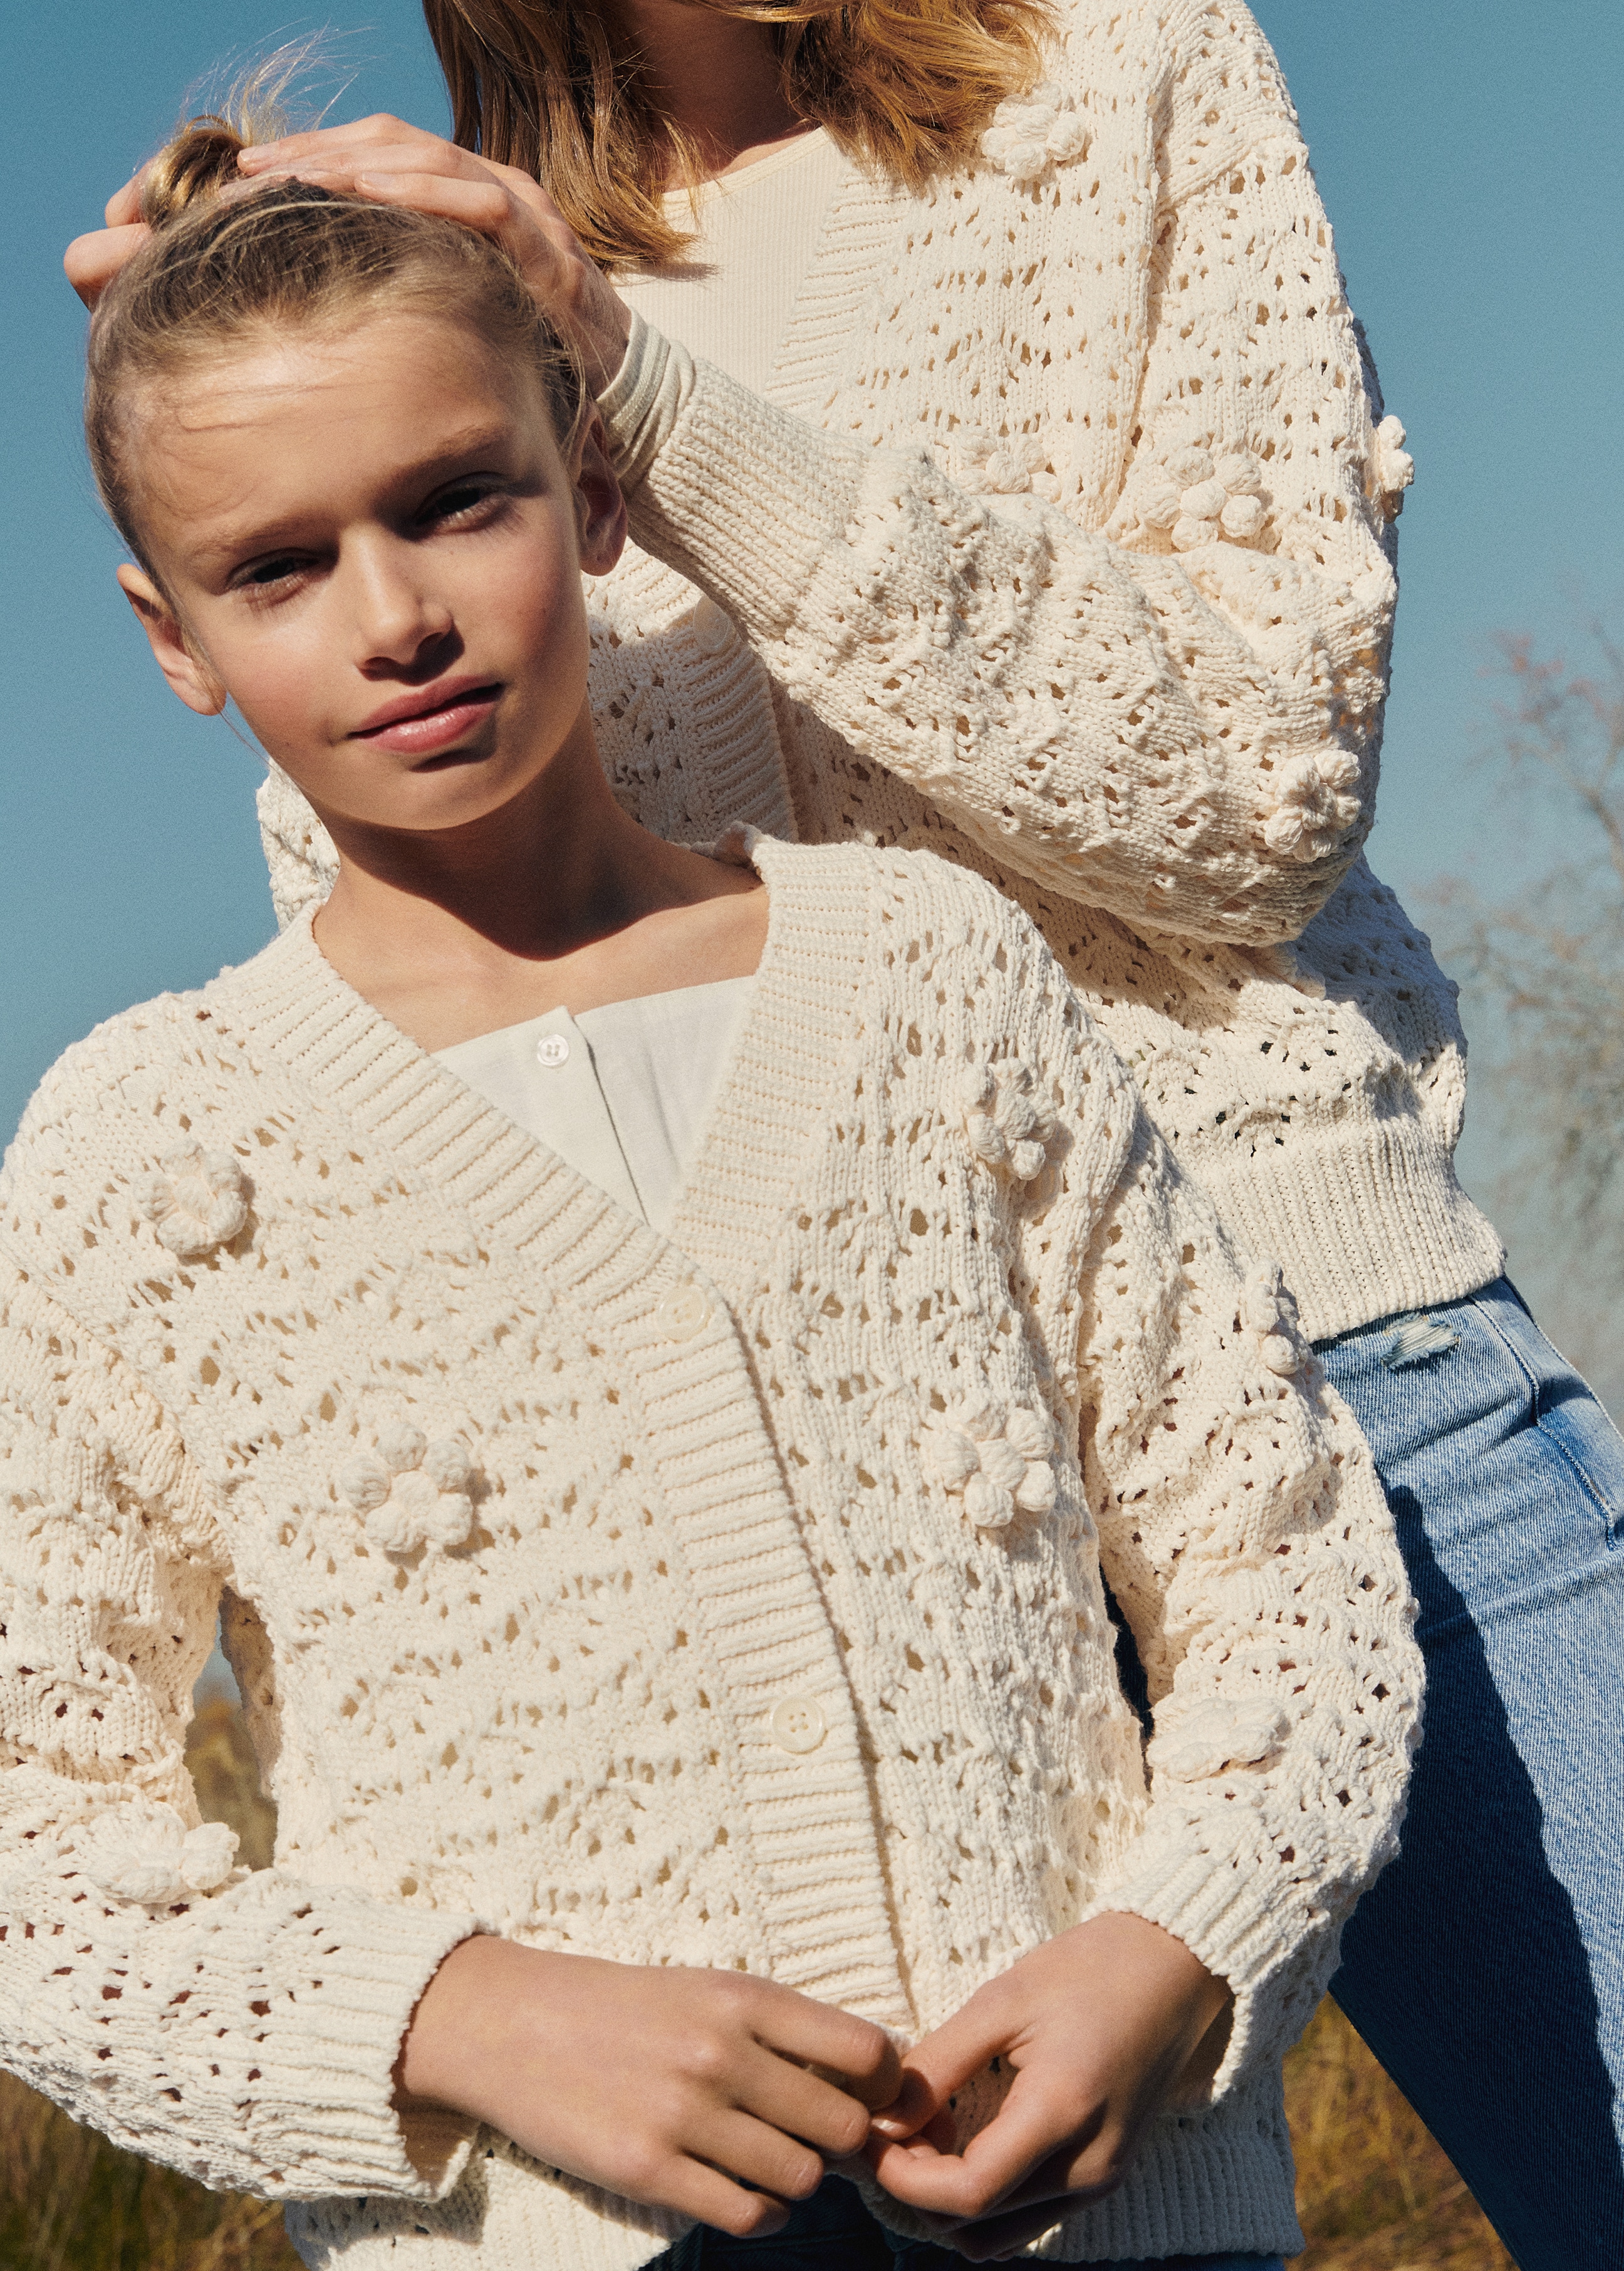 Openwork knit cardigan - Details of the article 6